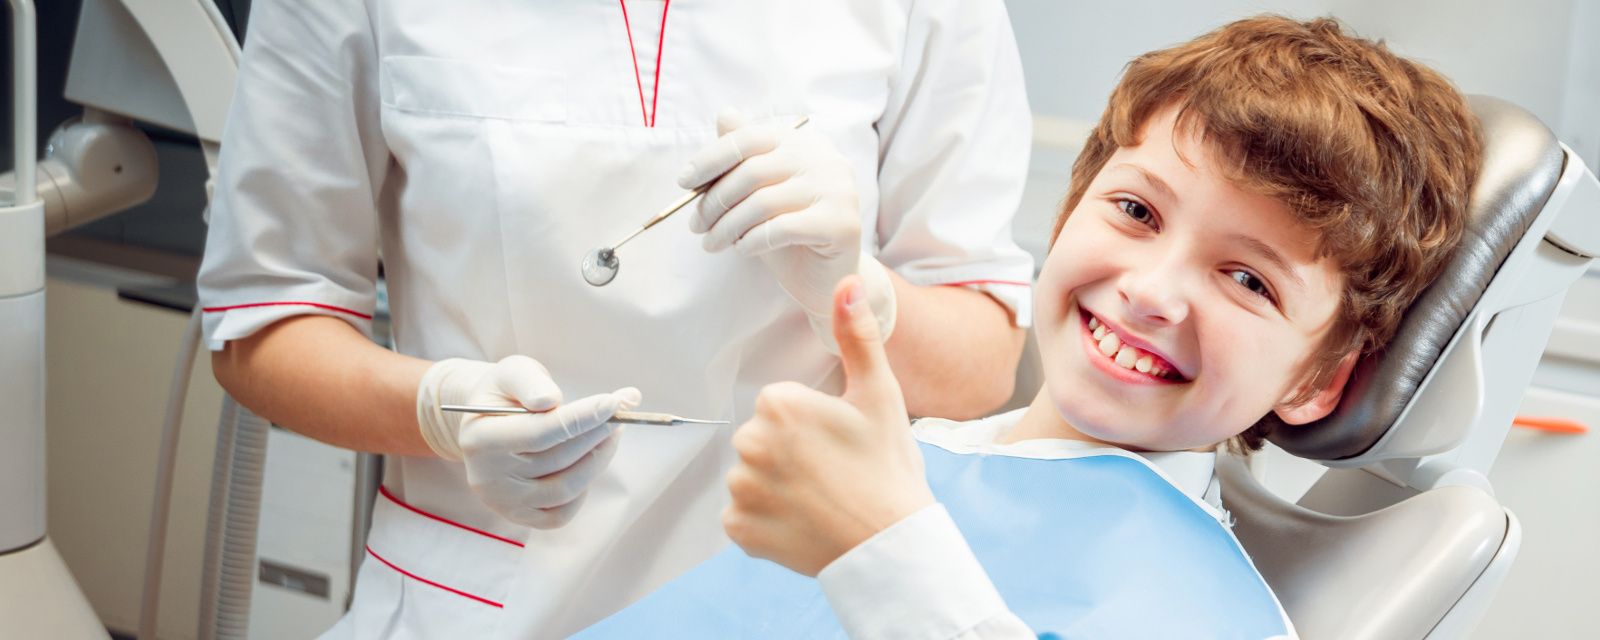 Smiles Across Generations: The Importance of a Family Dentist